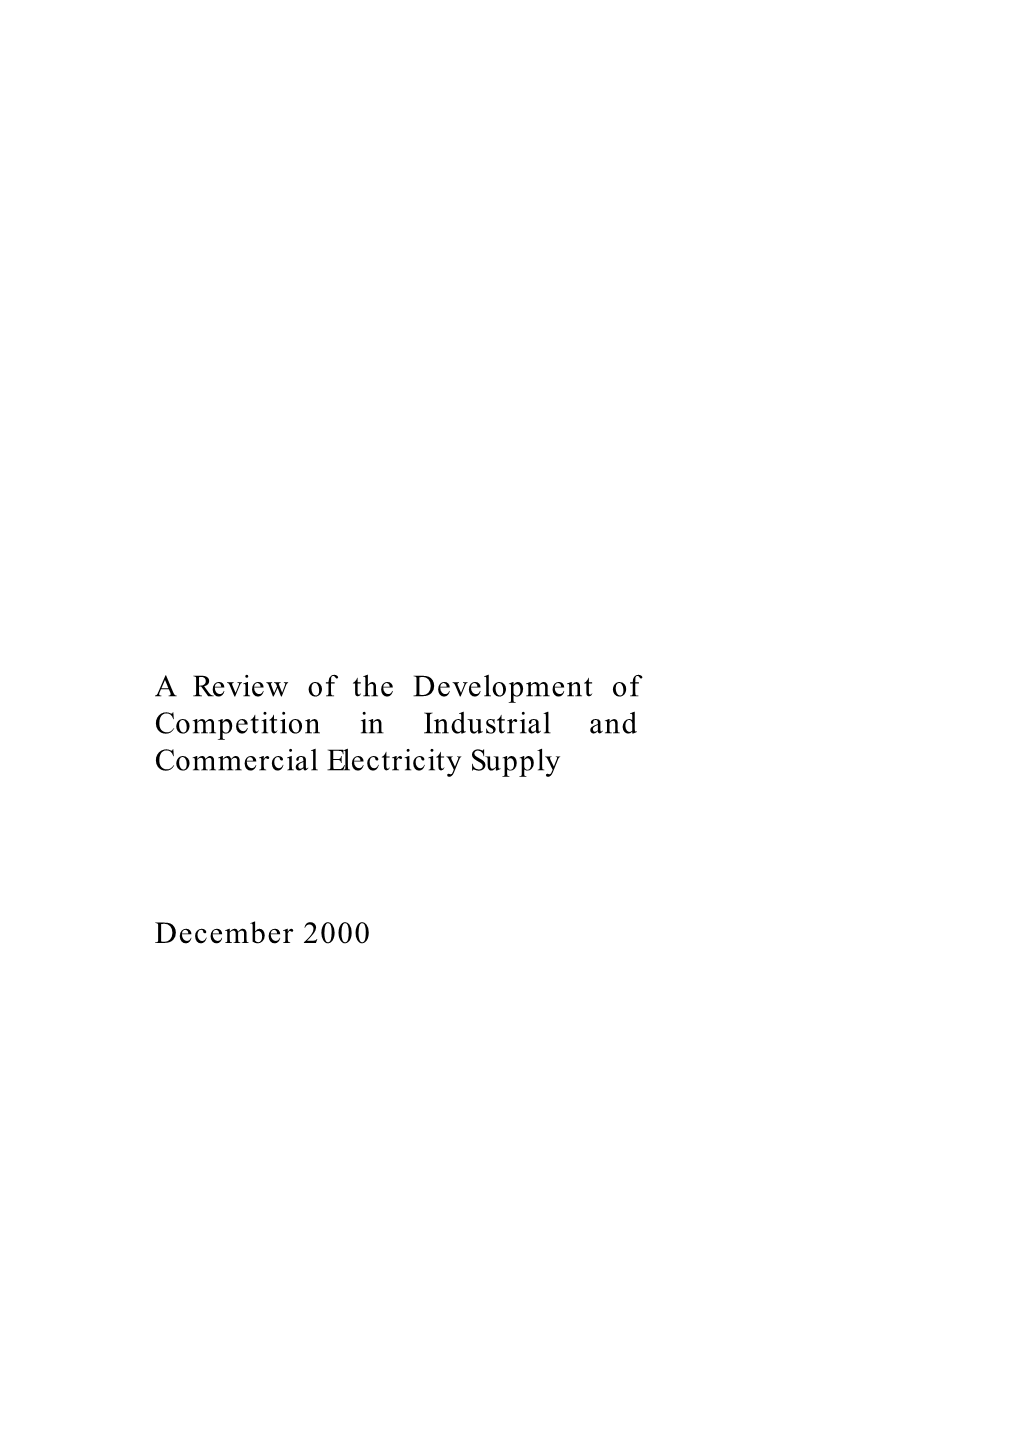 A Review of the Development of Competition in Industrial and Commercial Electricity Supply